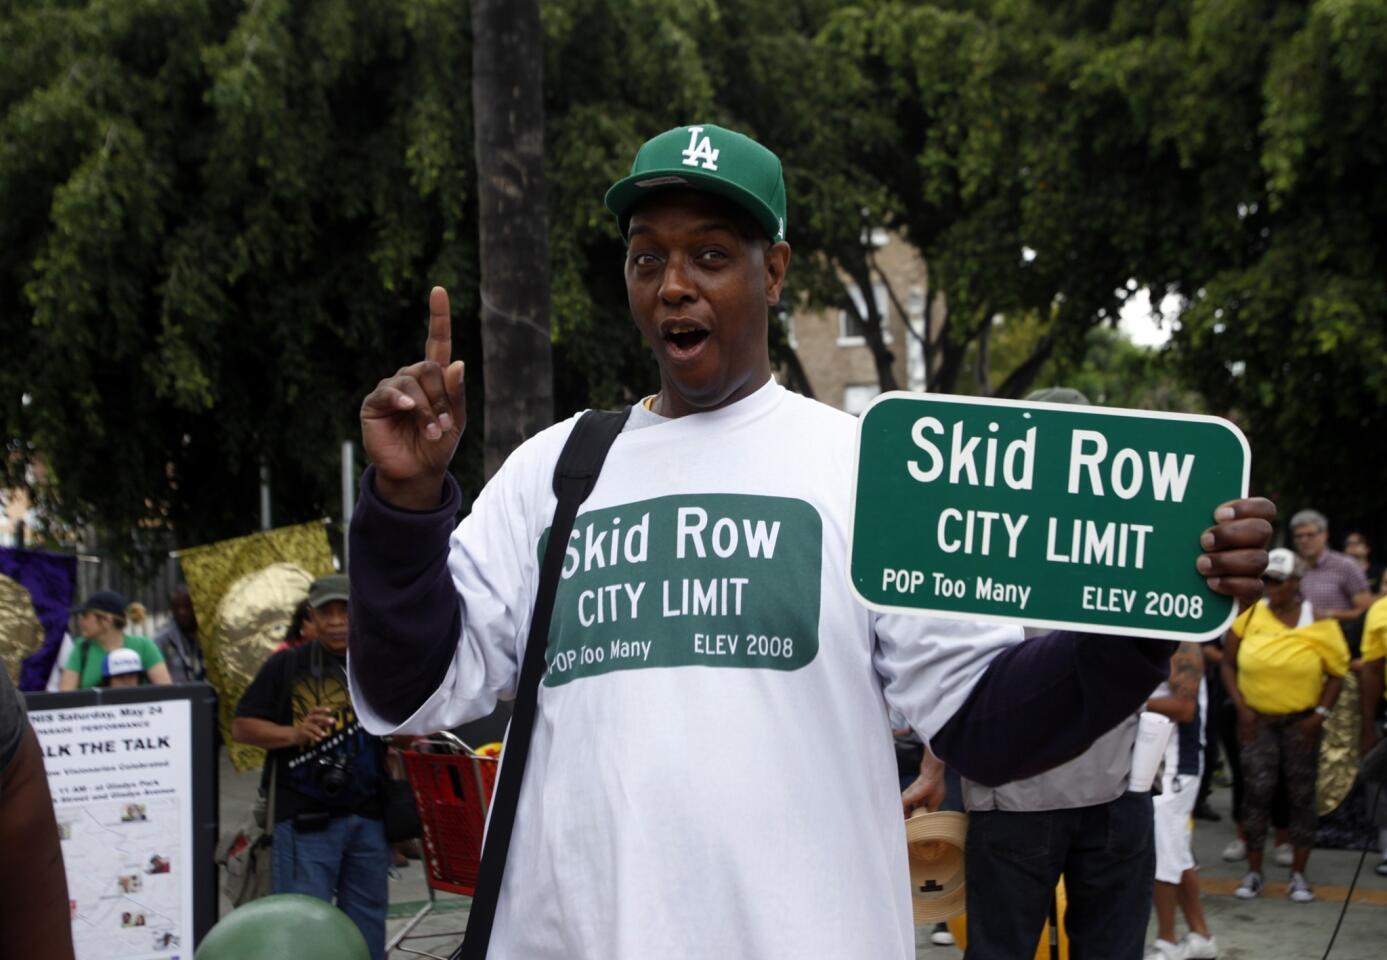 Downtown L.A. Neighborhood Council member General Jeff Page joins in the celebration of skid row and its leaders during the annual Walk the Talk parade.